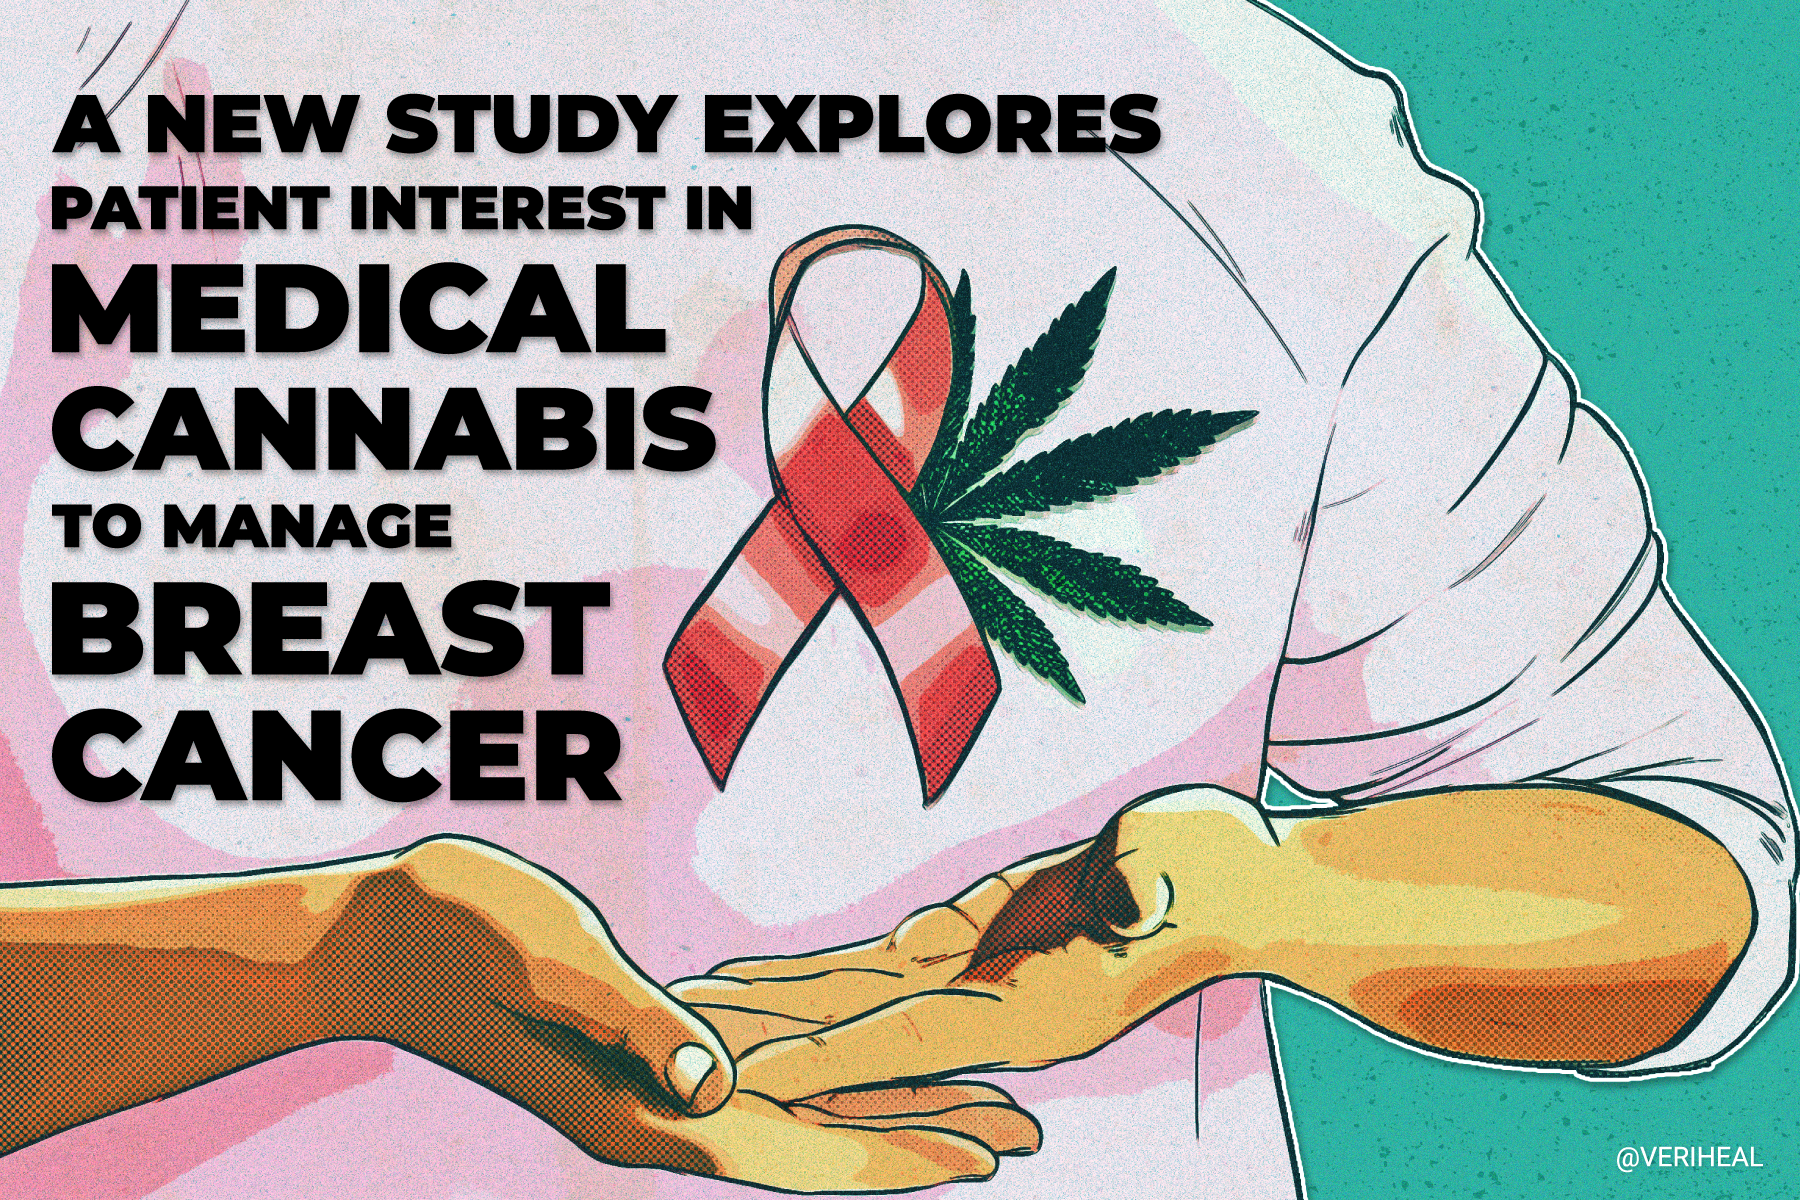 A New Study Explores Patient Interest in Medical Cannabis for Breast Cancer